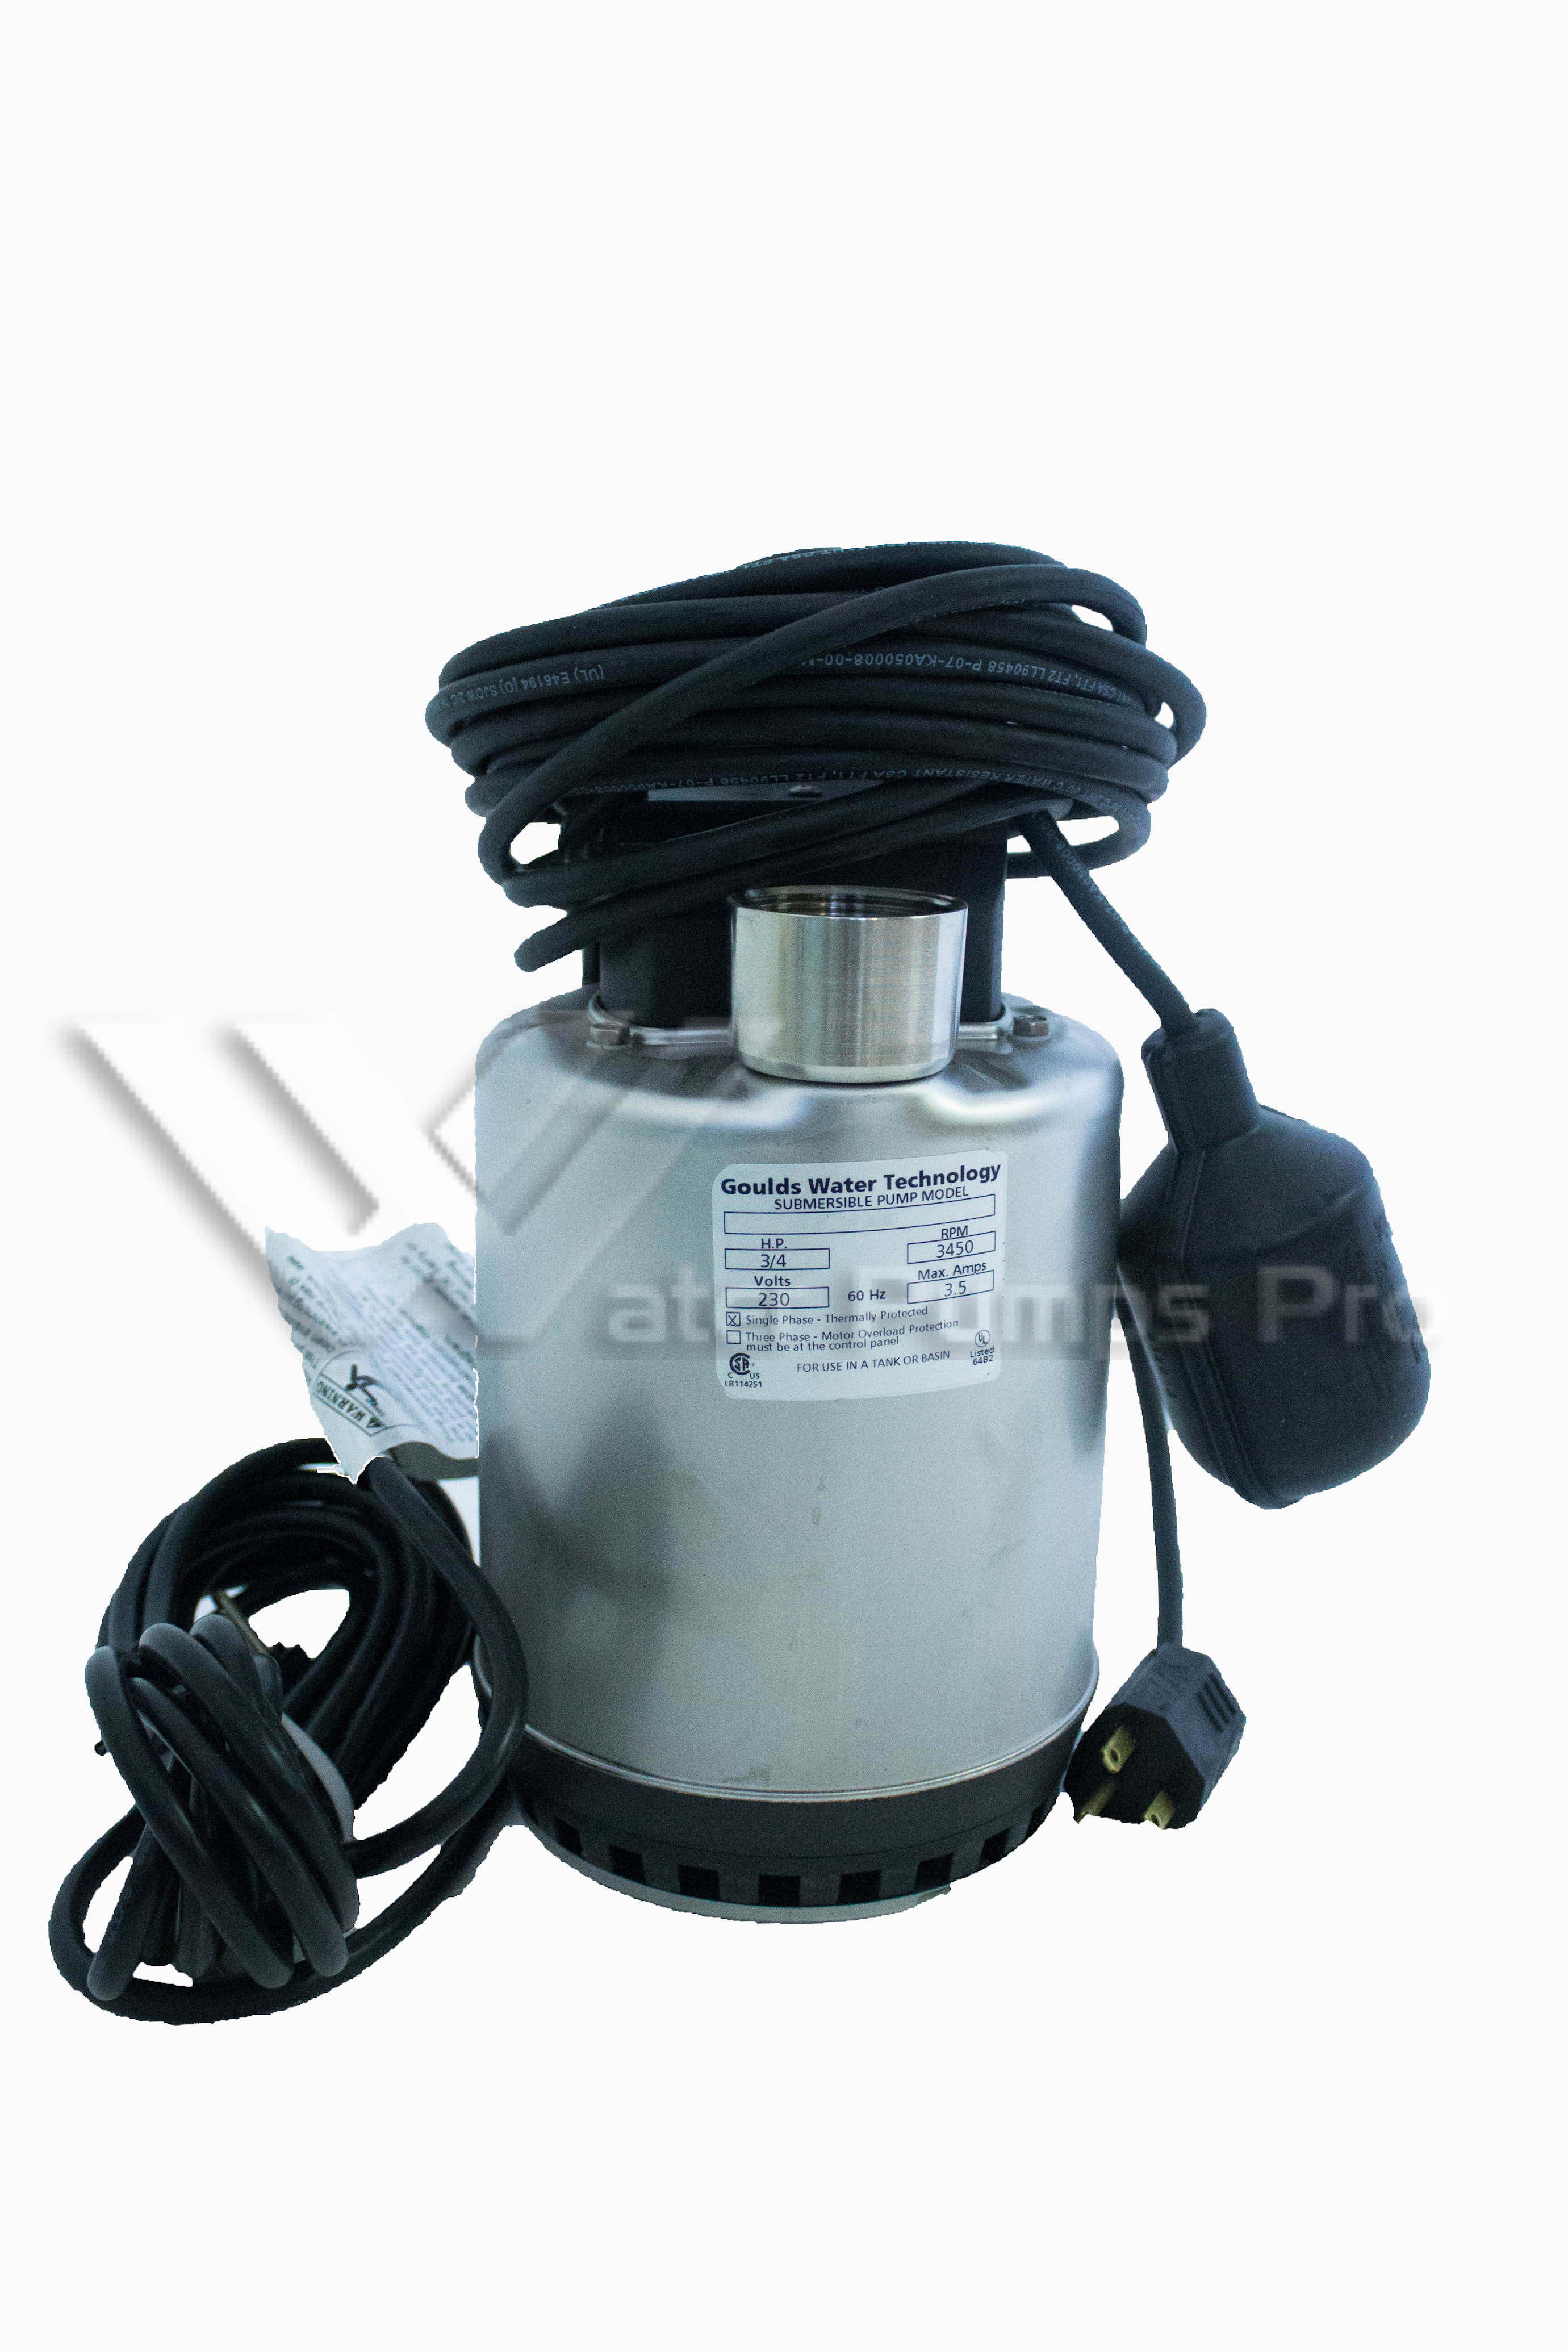 Goulds LSP0311A 1/3 HP 115V- Submersible Sump Pump - Click Image to Close